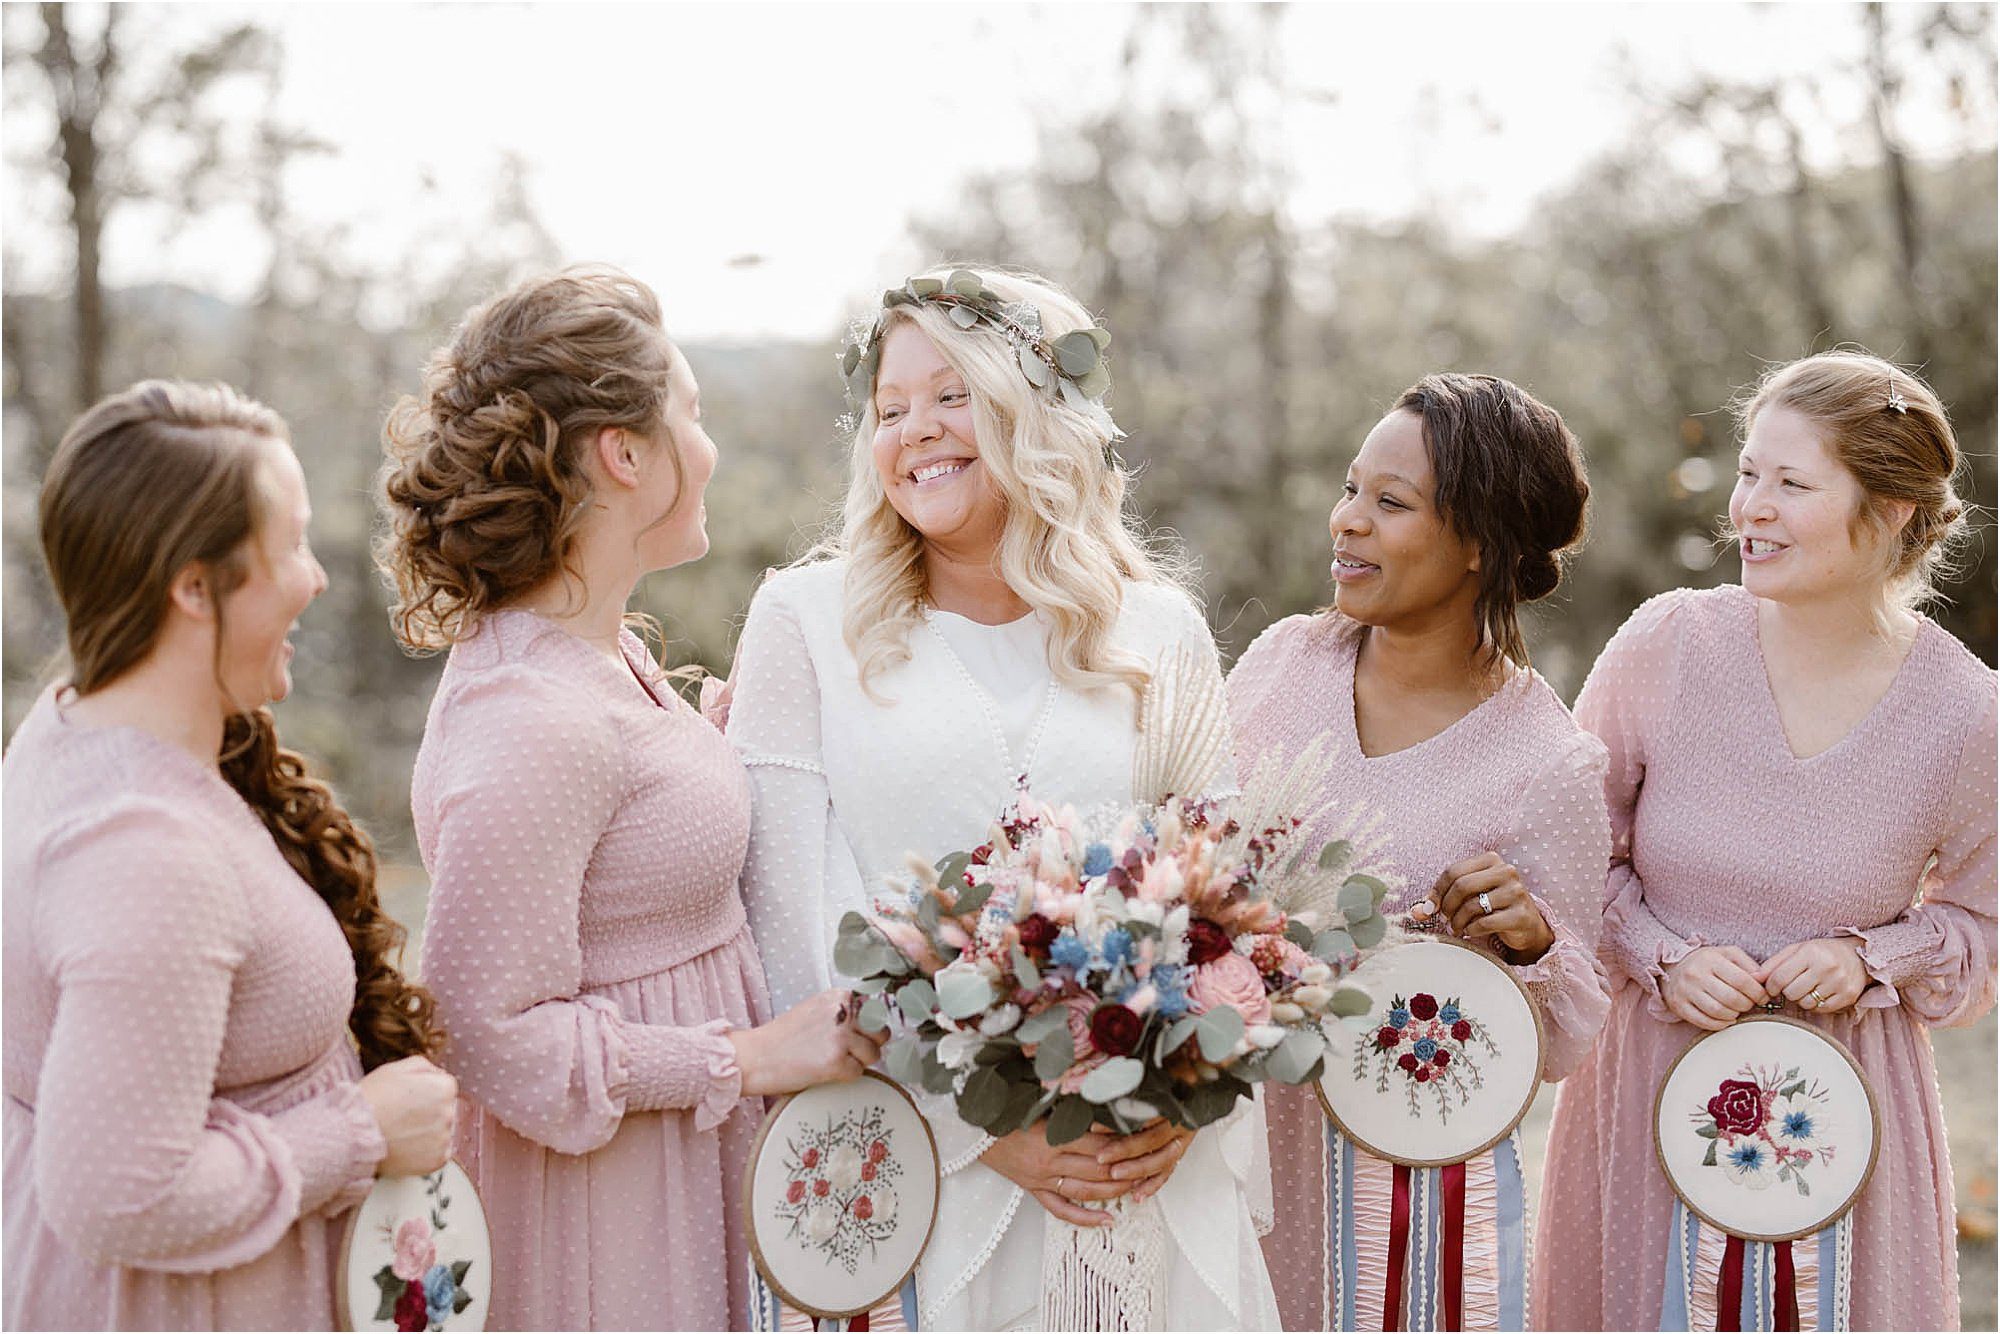 boho bride and bridesmaids in pink dresses holding needlepoint bouquets